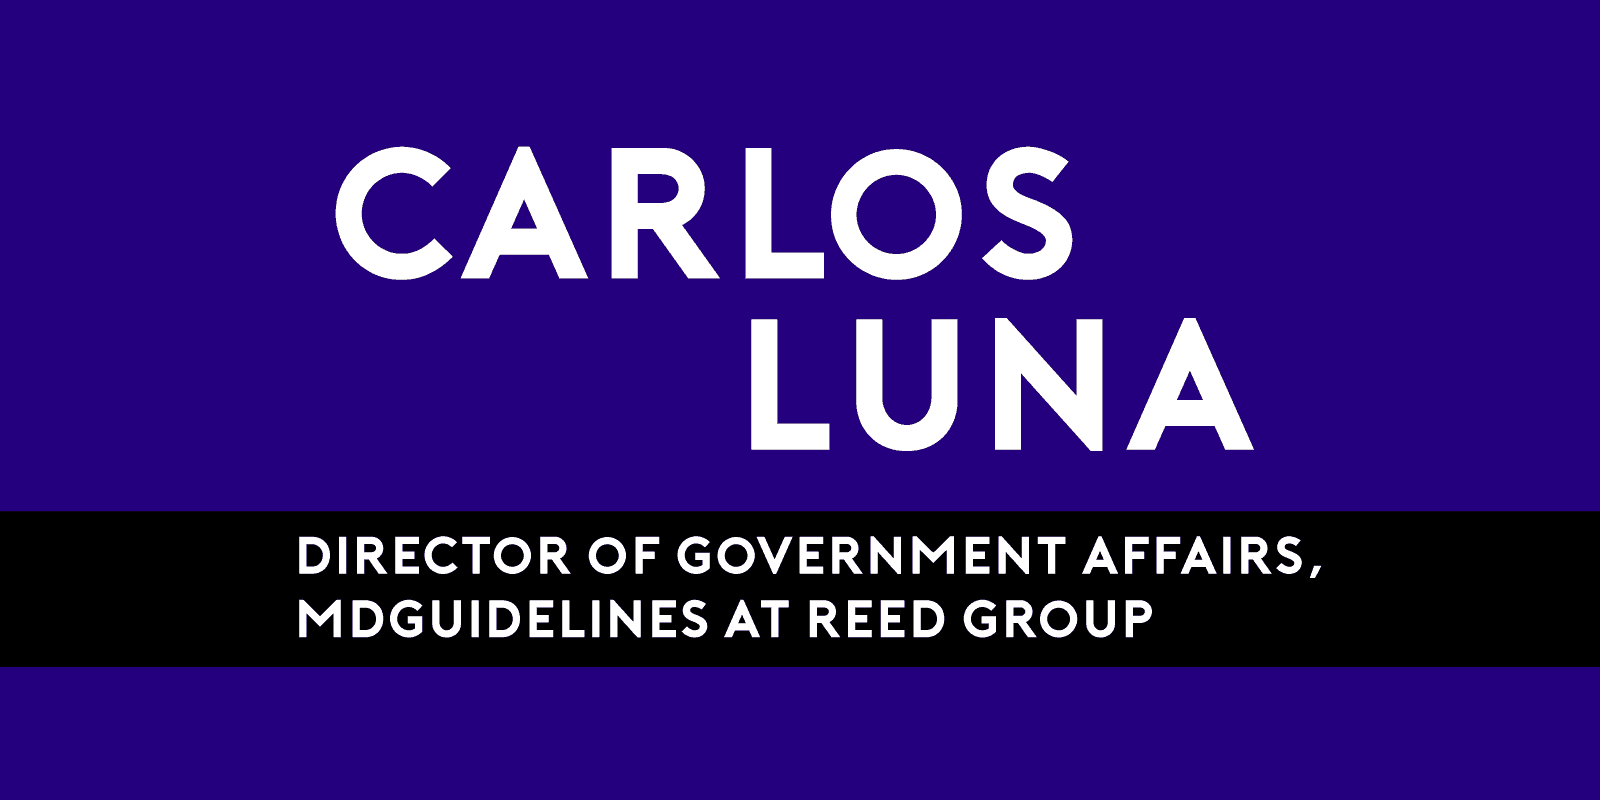 This week's Thursday Thought Leader is Carlos Luna, the Director of Government Affairs MDGuidelines at Reed Group, as featured by LegalNet Inc, a litigation cost management company.